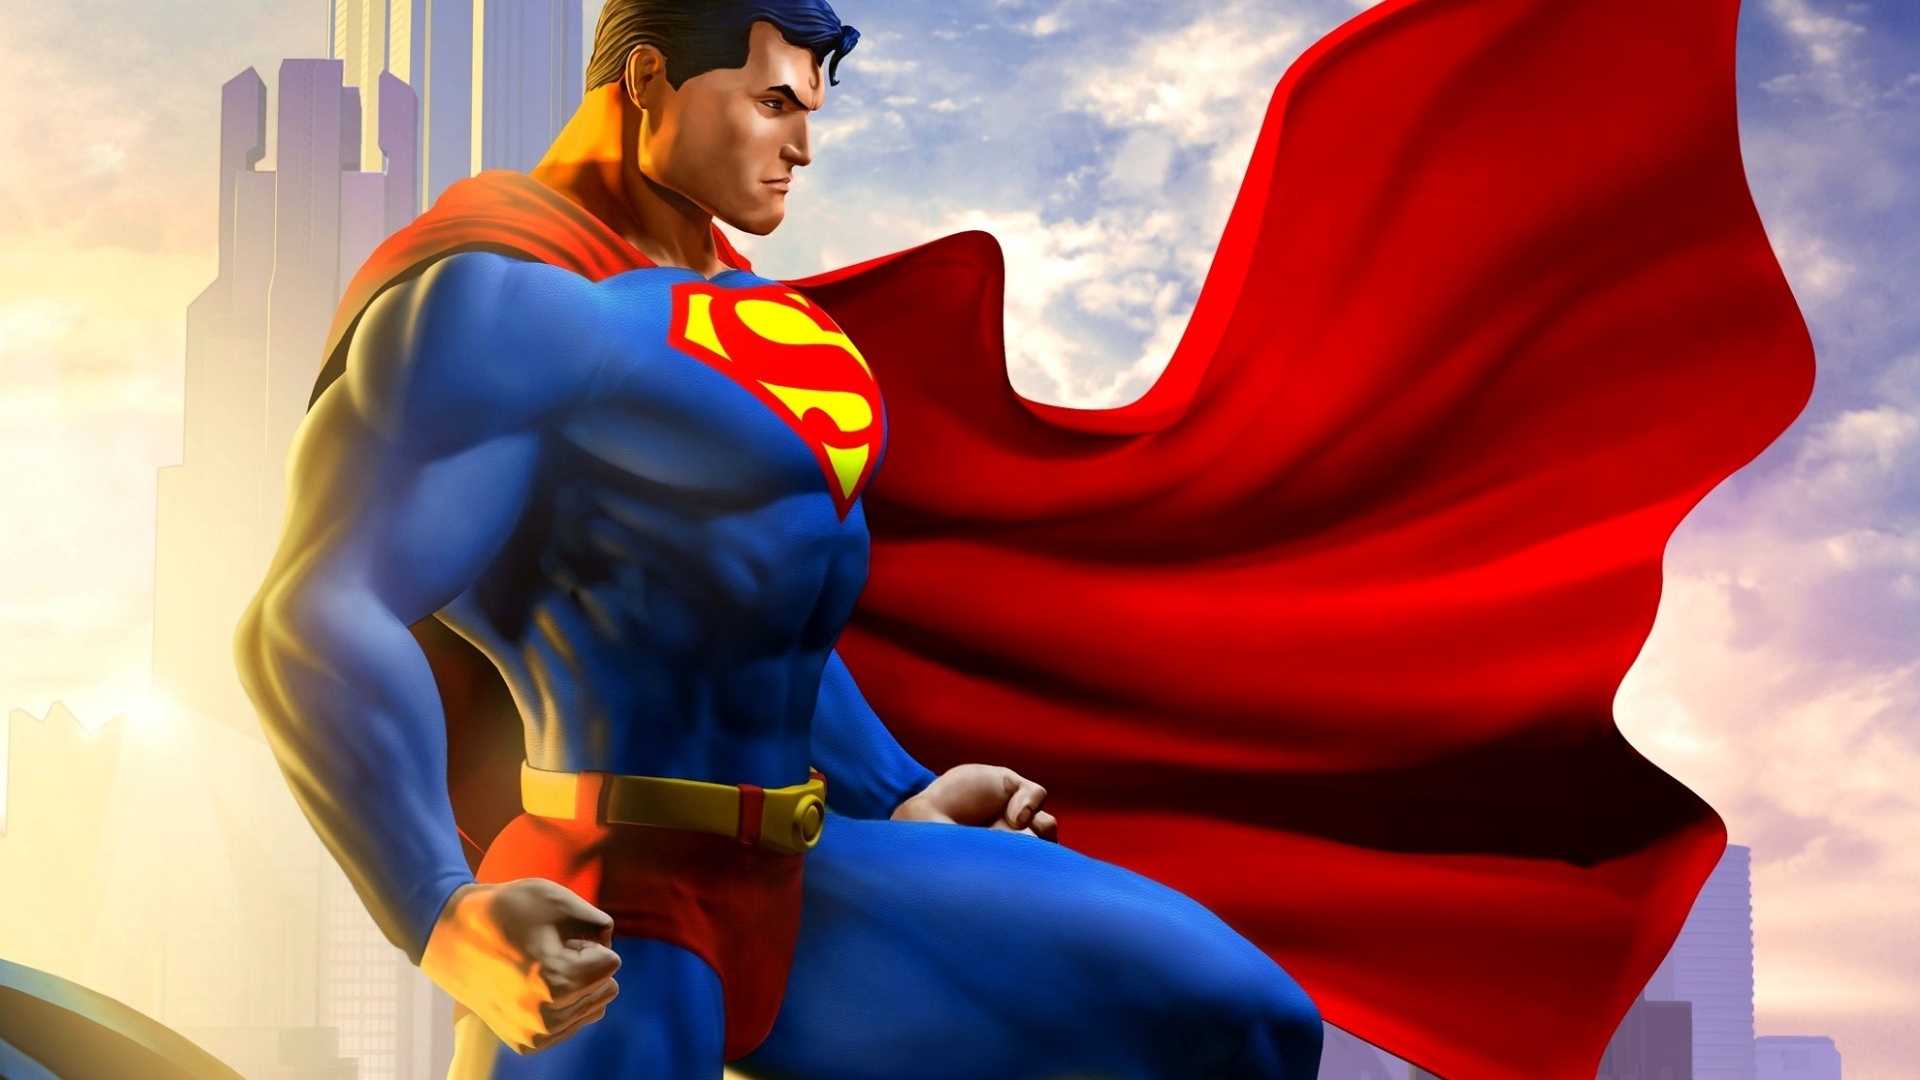 Superman HD Background Image For Fb Cover Cartoons Wallpaper